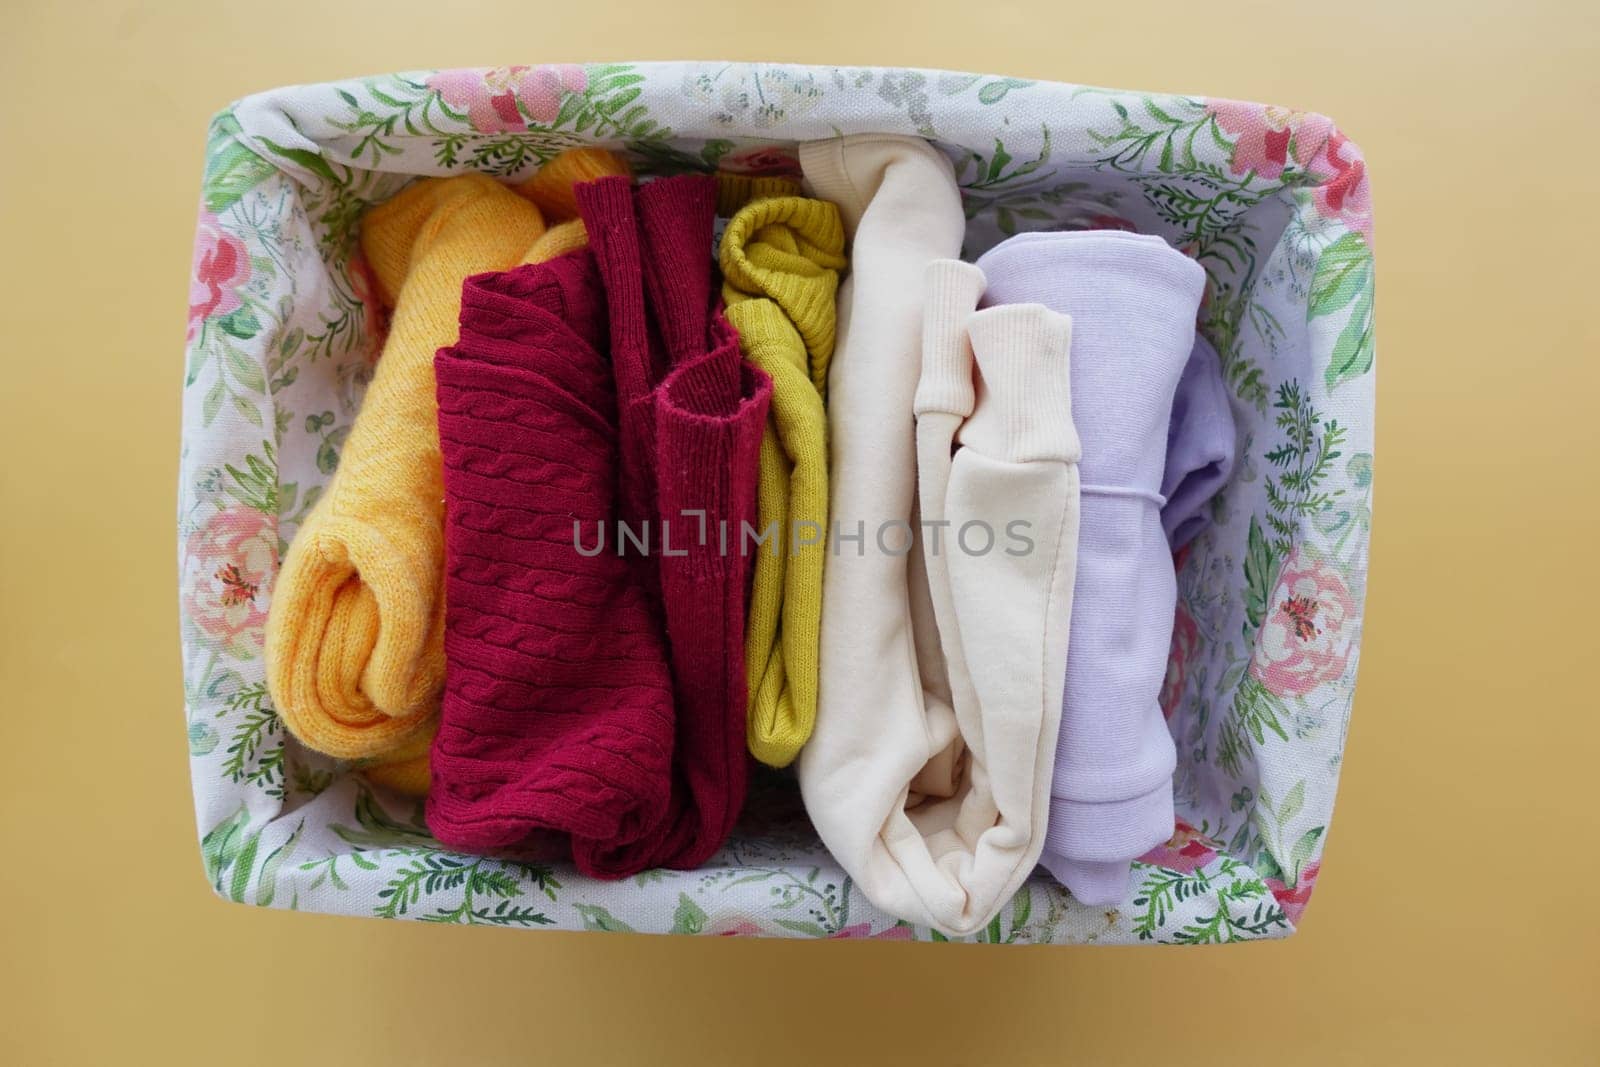 A rectangle violet basket of kid cloths on the table.